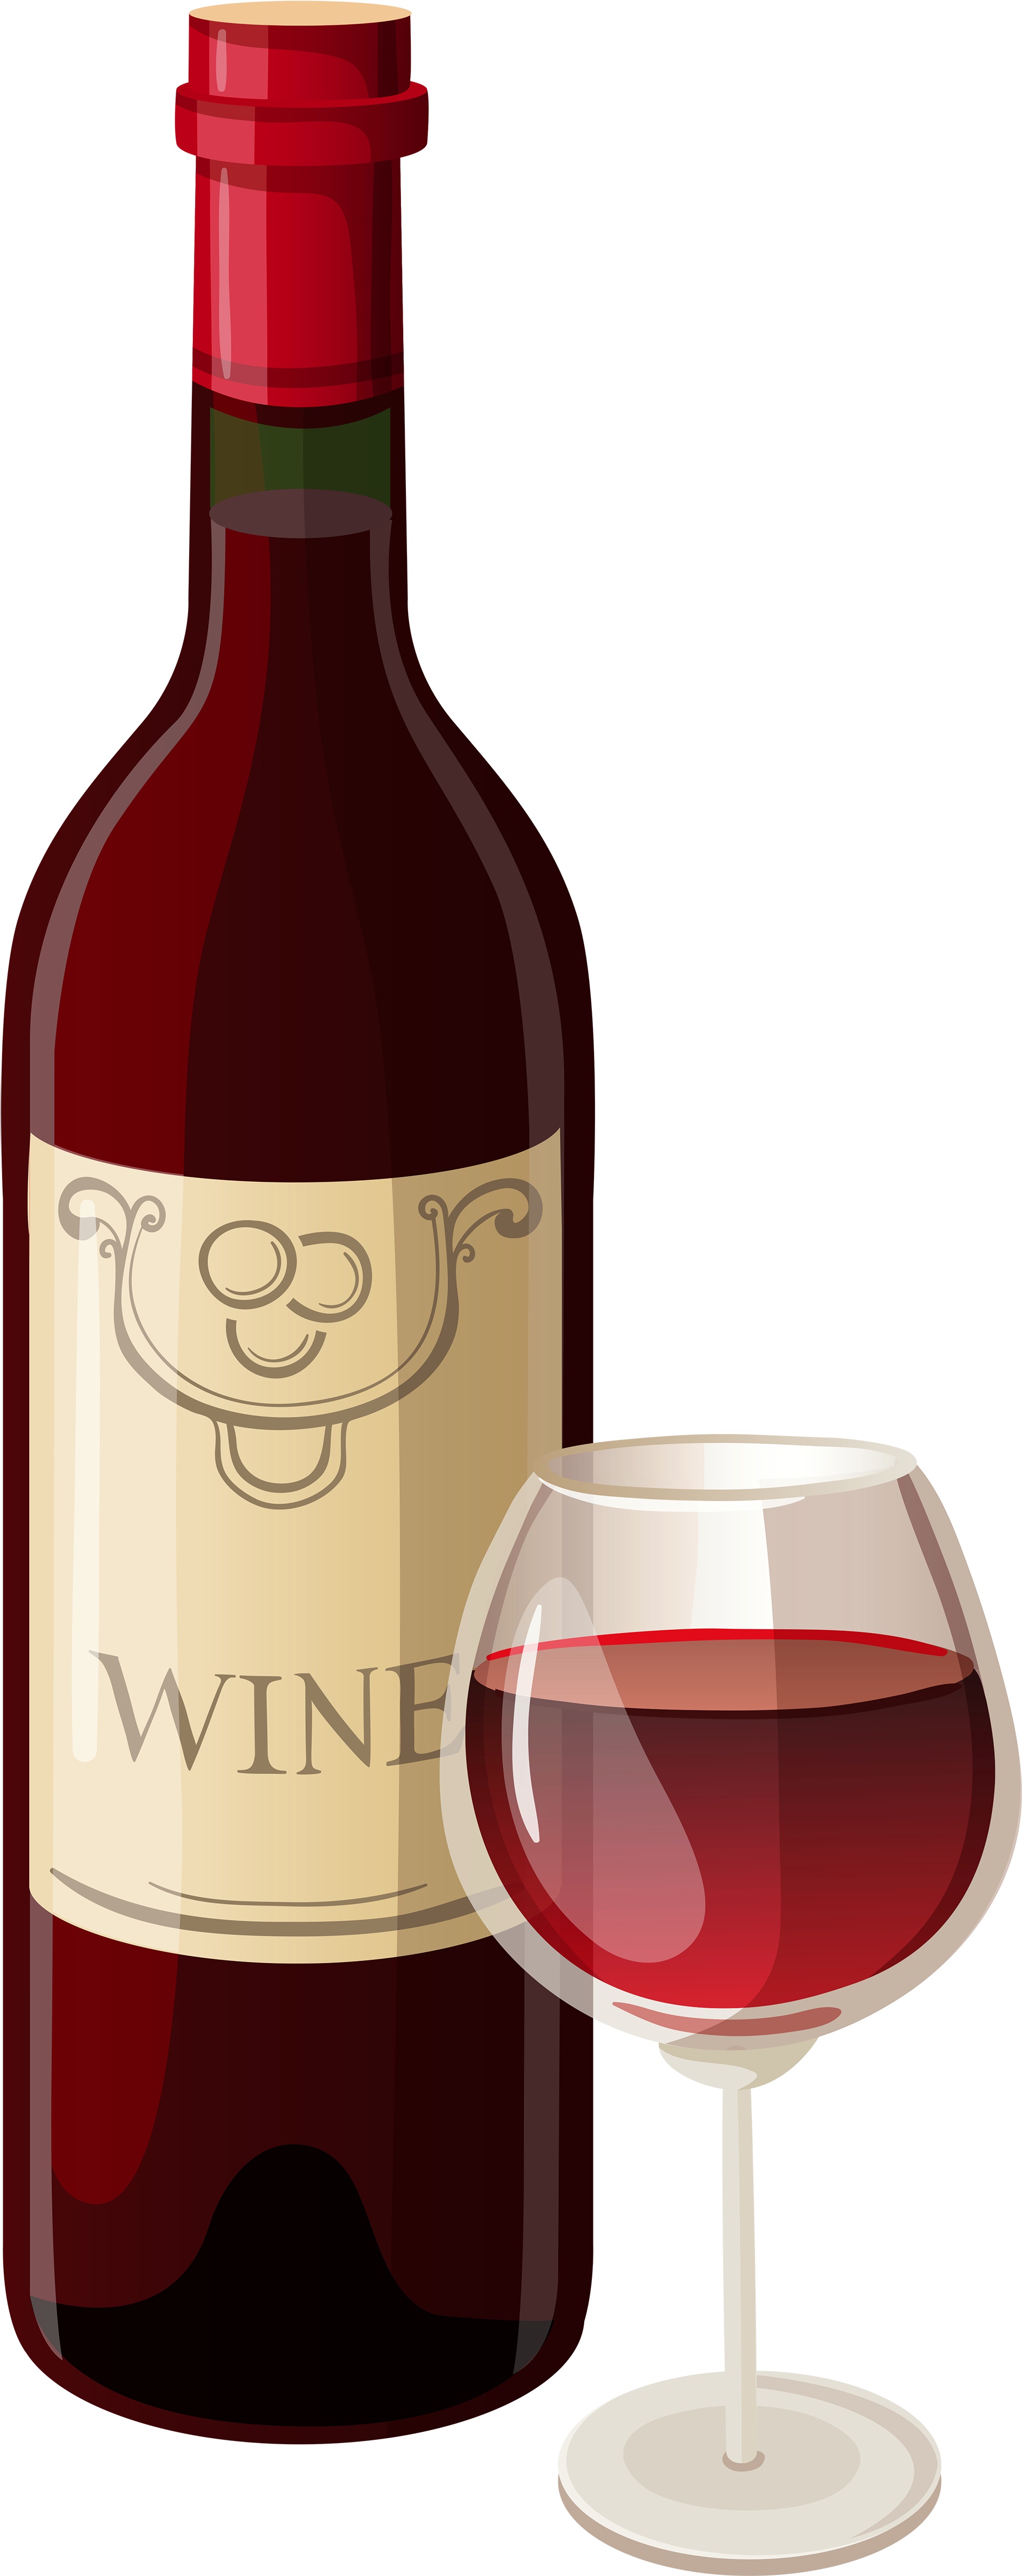 Wine Bottle And Glass Png Vector Clipart Transparent